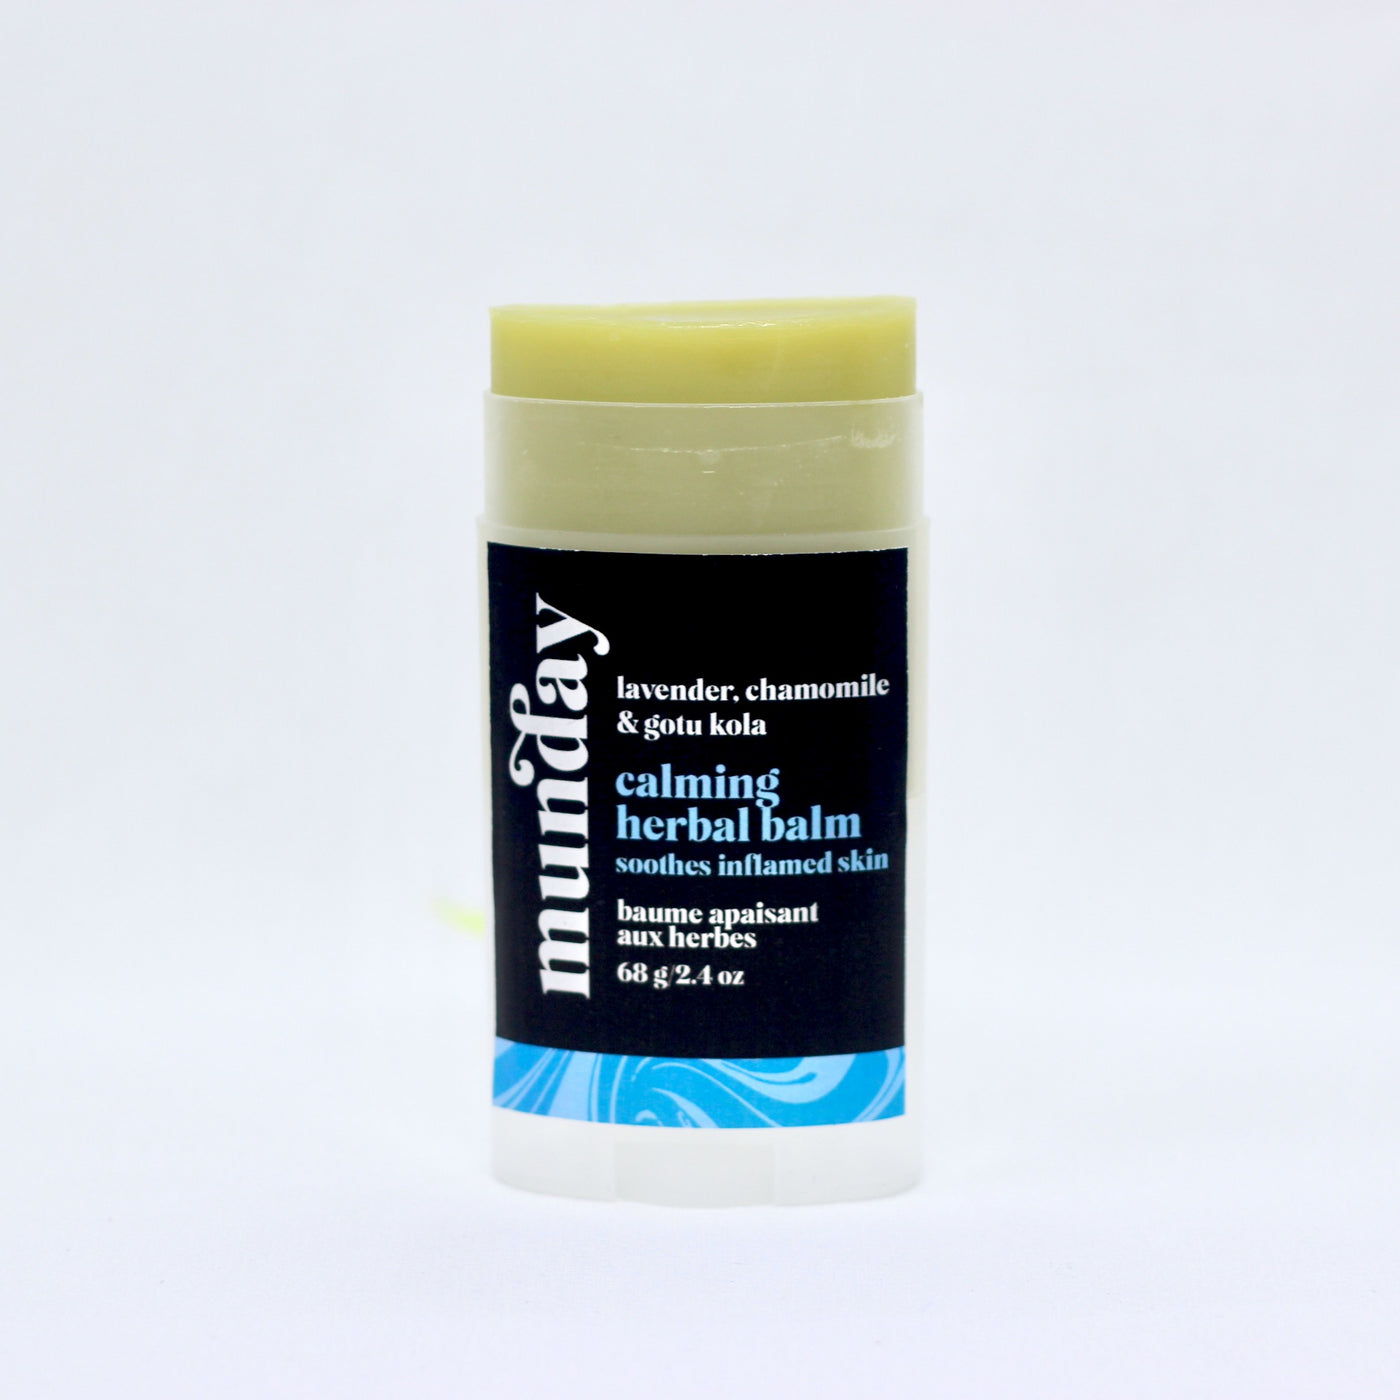 Herbal Balm infused with lavender, chamomile and gotu kola. Designed to calm the skin.